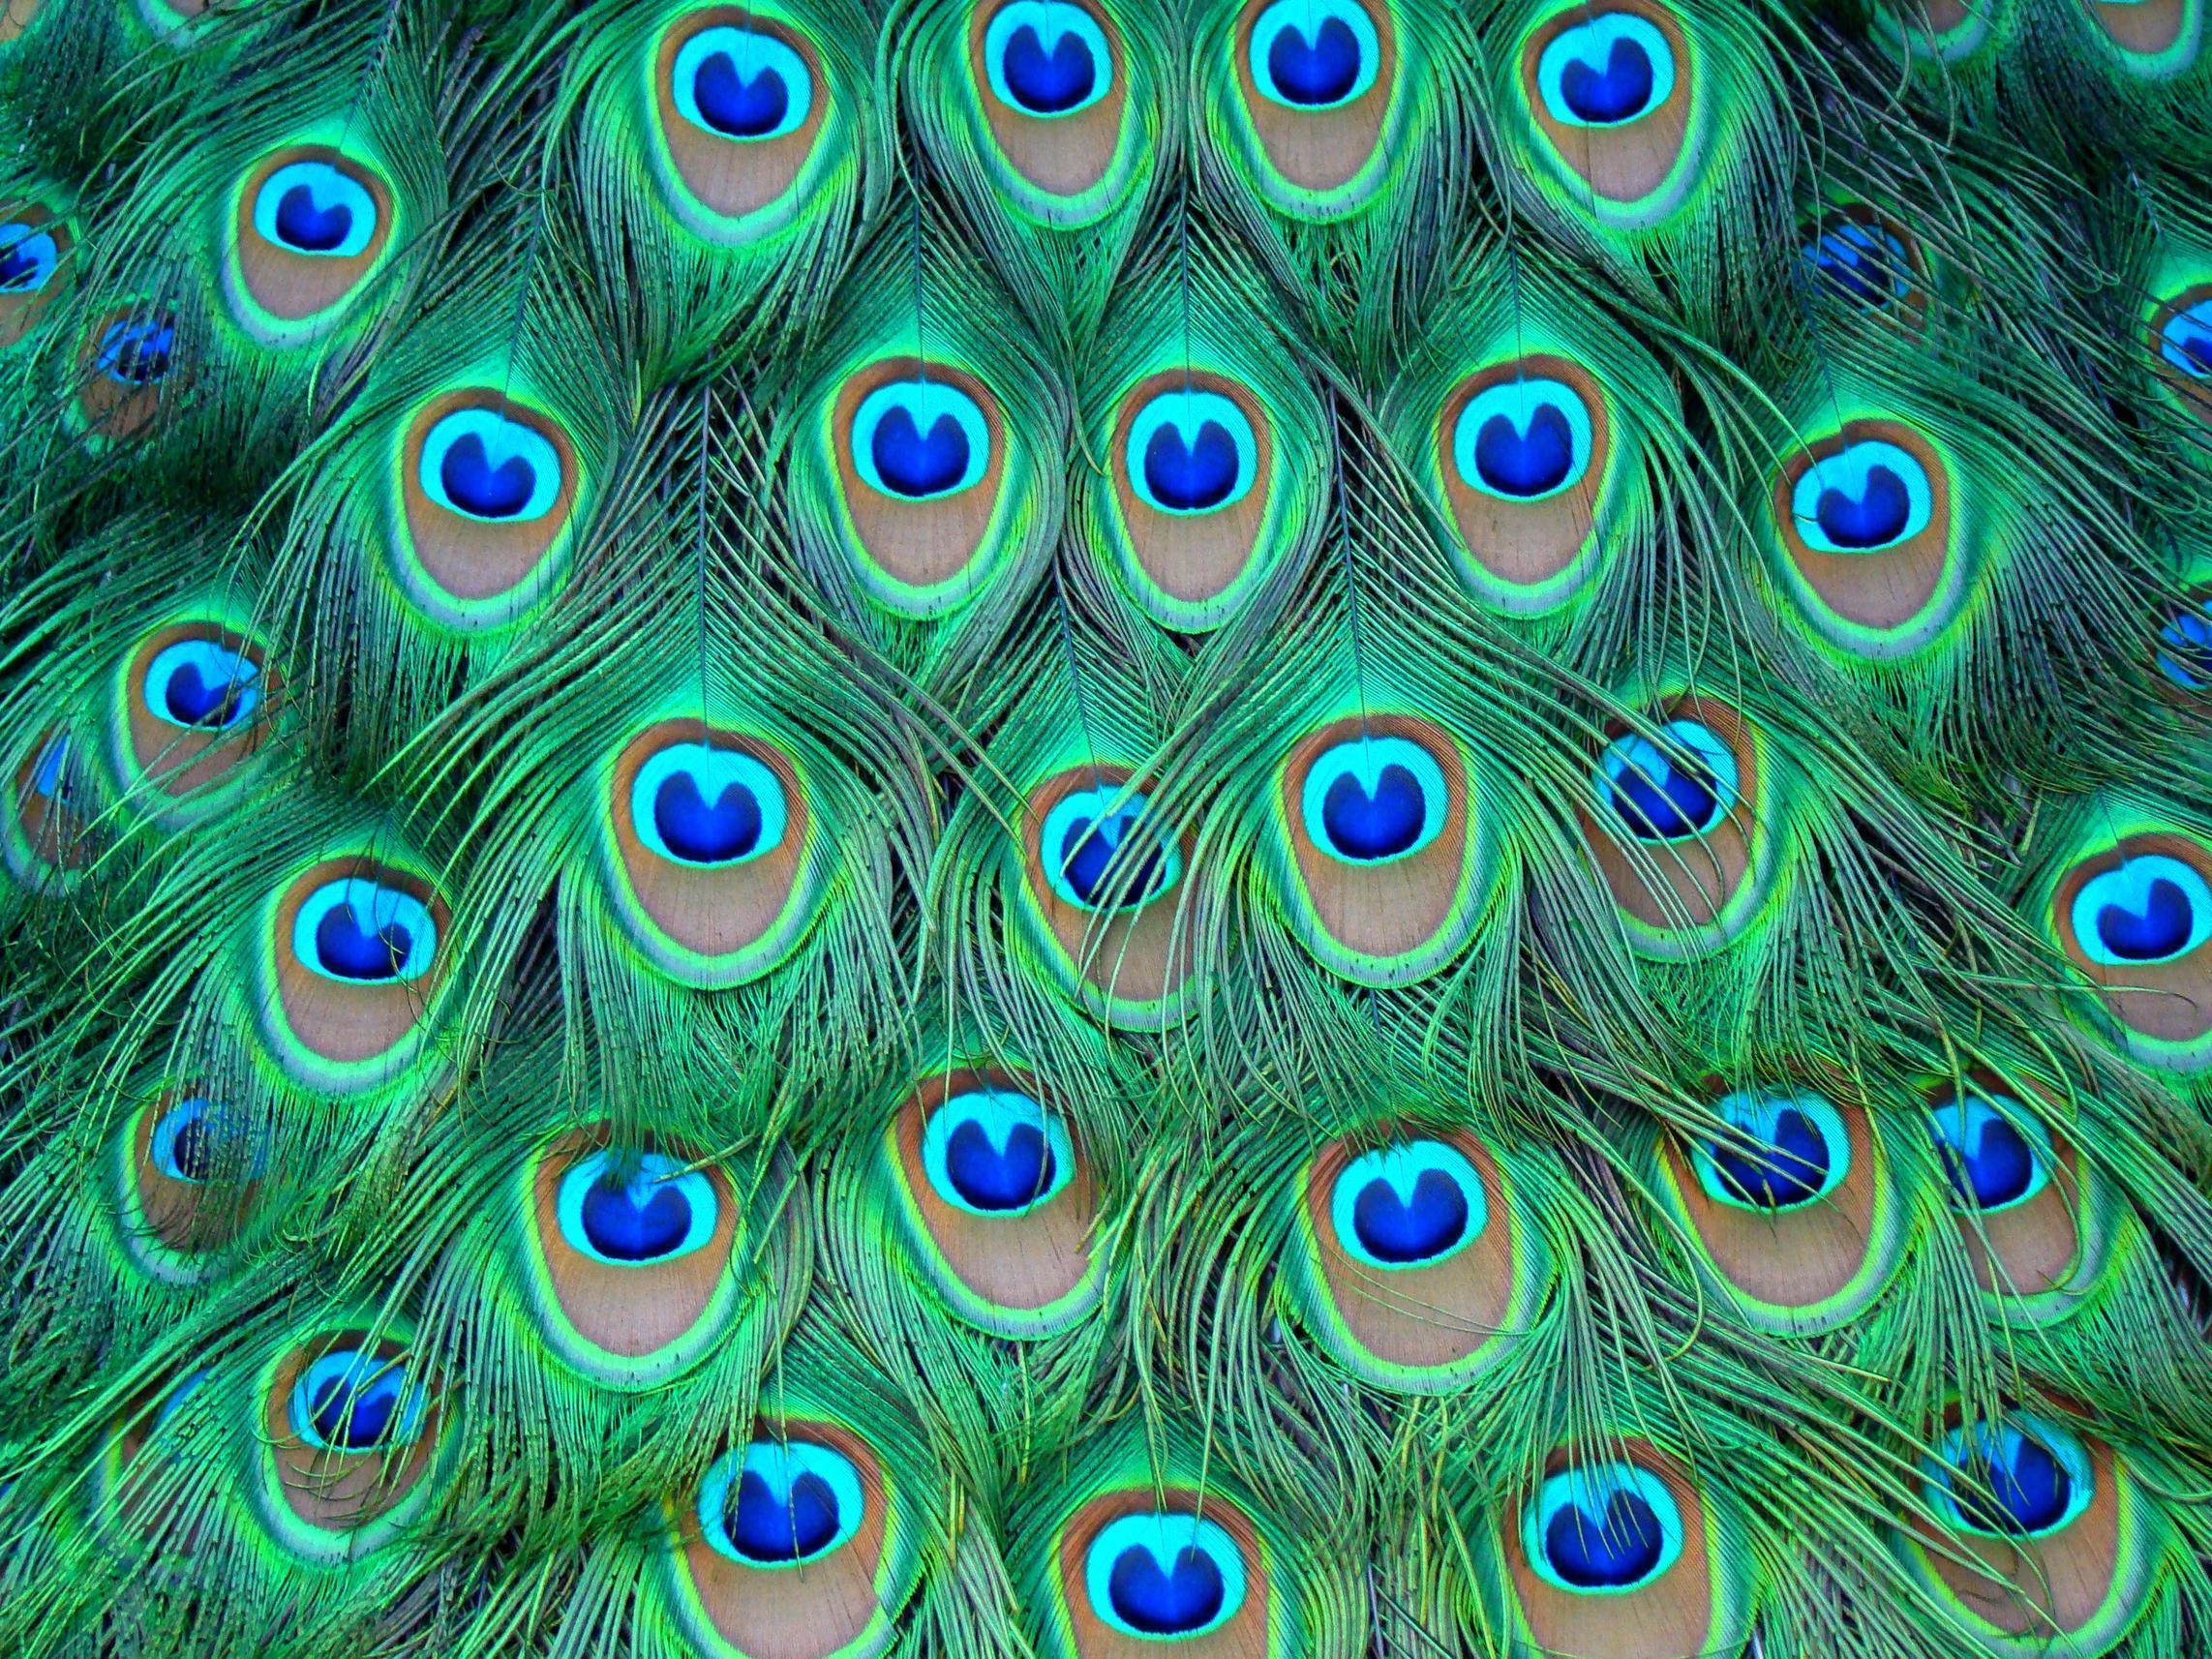 2285x1714 Get Inspired For Wallpaper Hd Wallpaper Mor Pankh Peacock Feather Picture